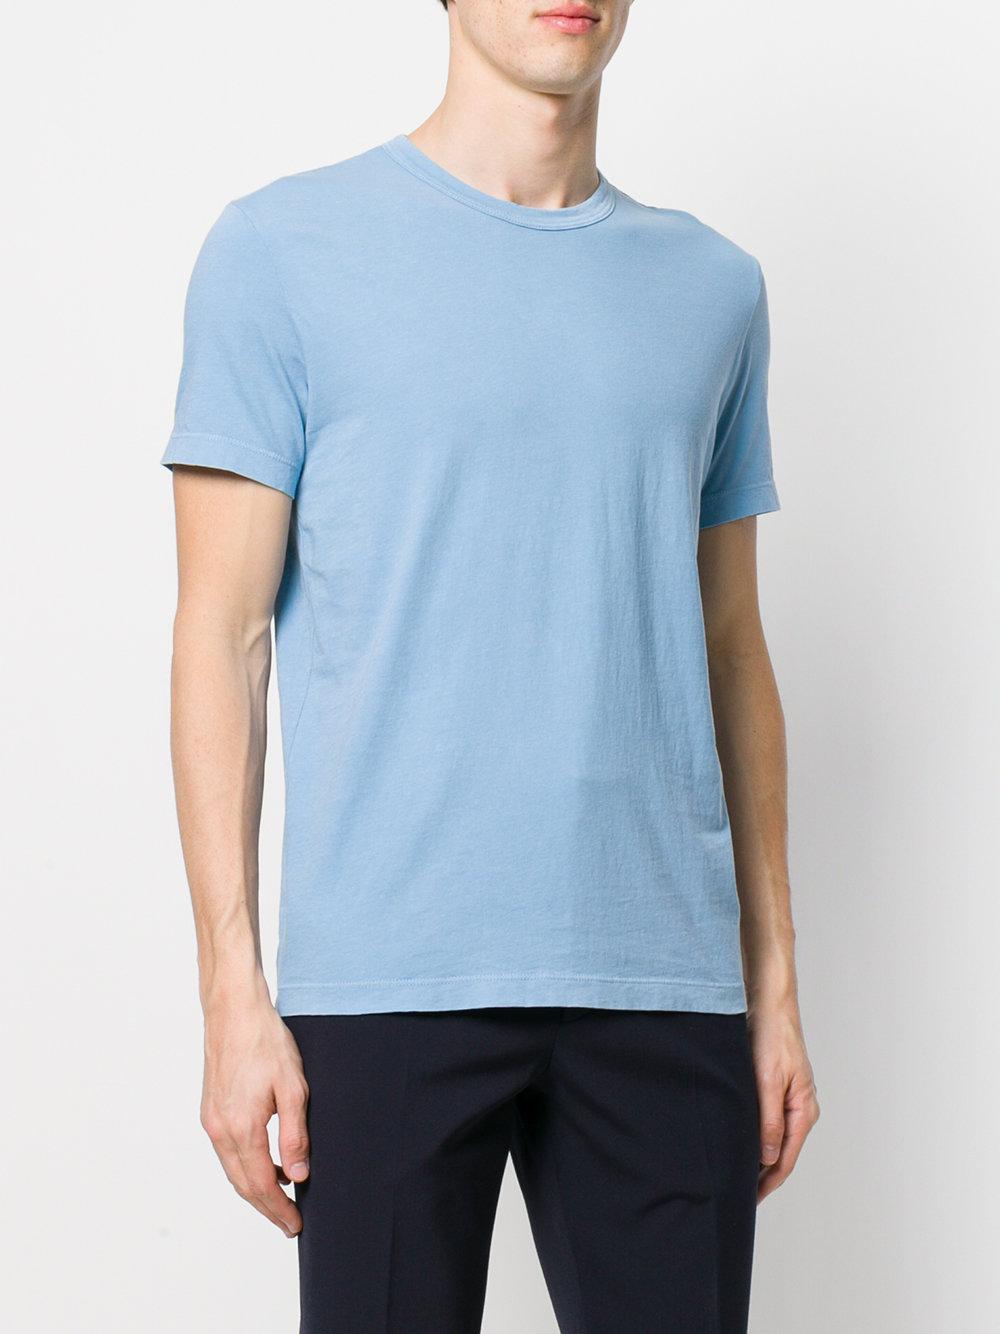 James Perse Cotton Round Neck T-shirt in Blue for Men - Lyst